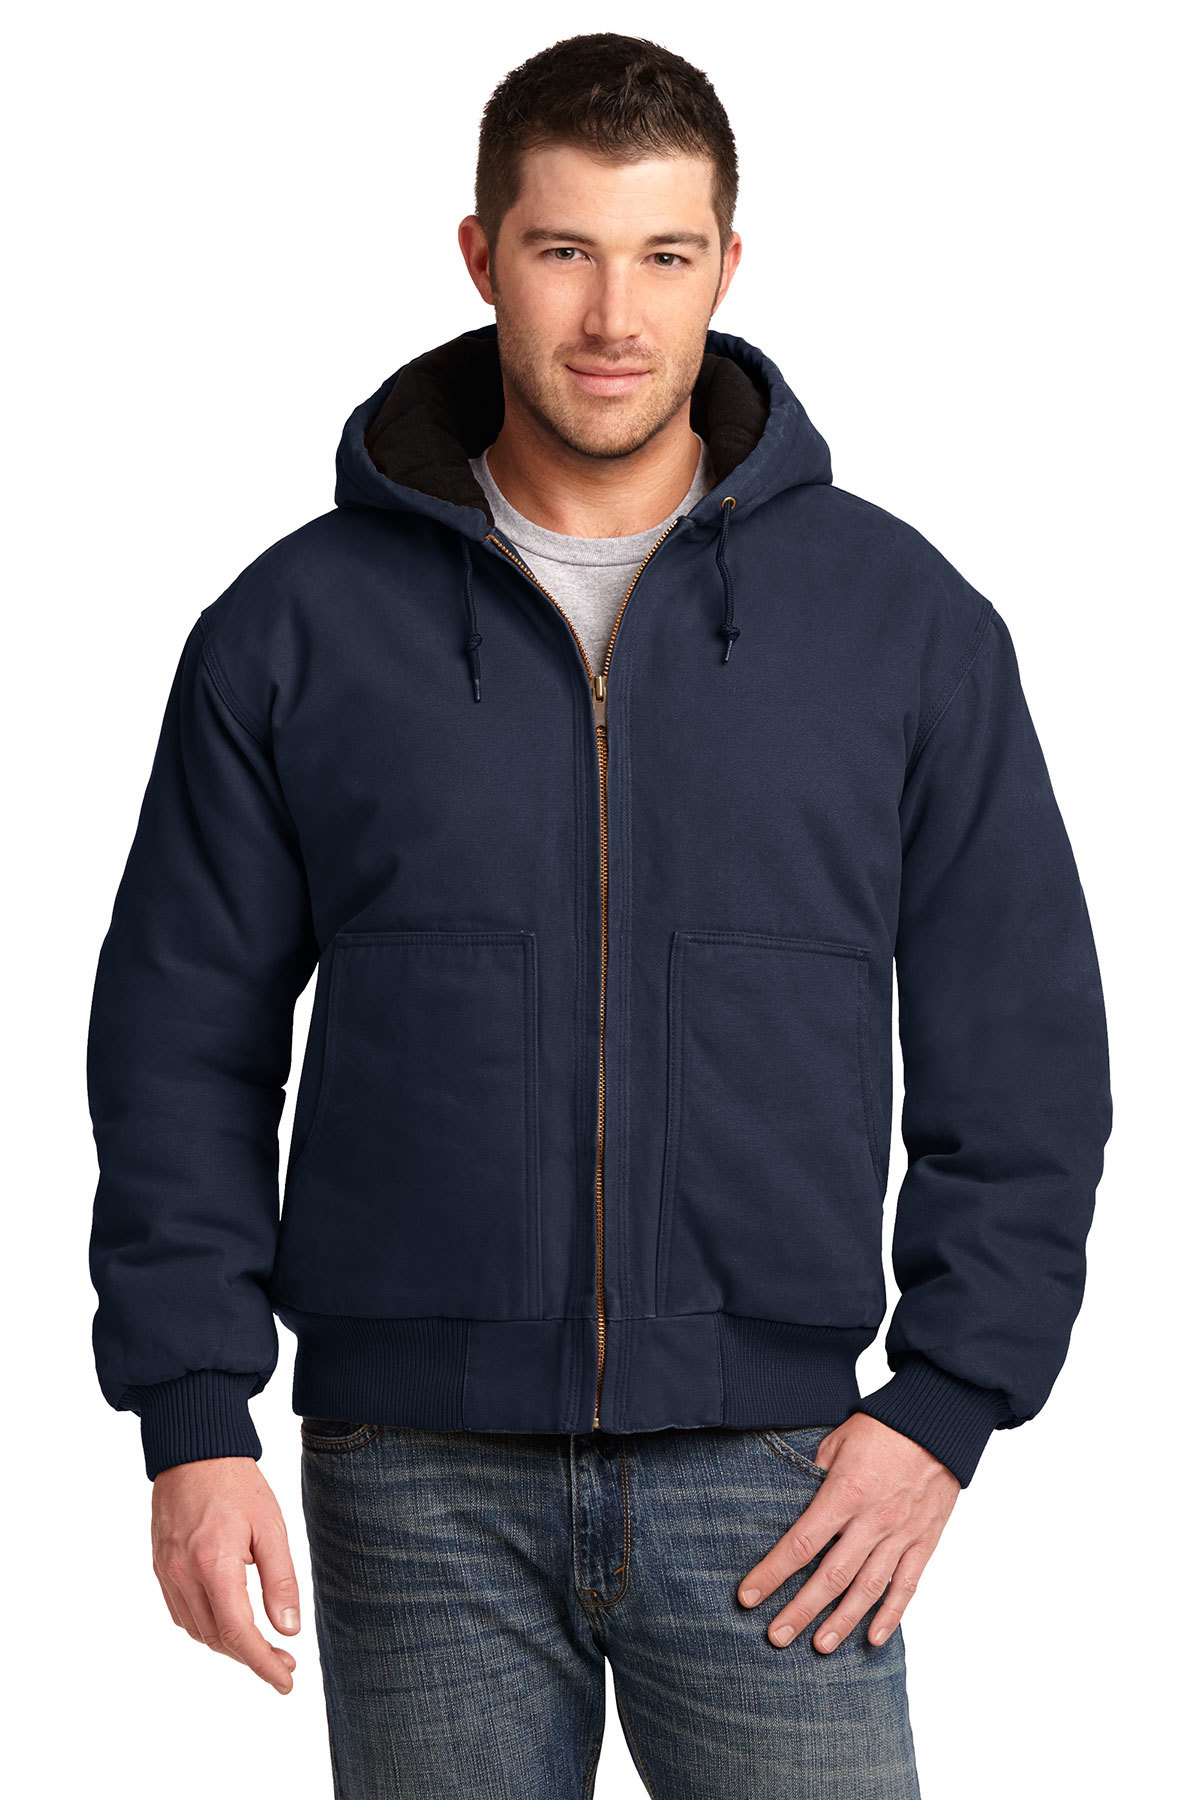 CornerStone CSJ41 Washed Duck Cloth Insulated Hooded Work Jacket ...